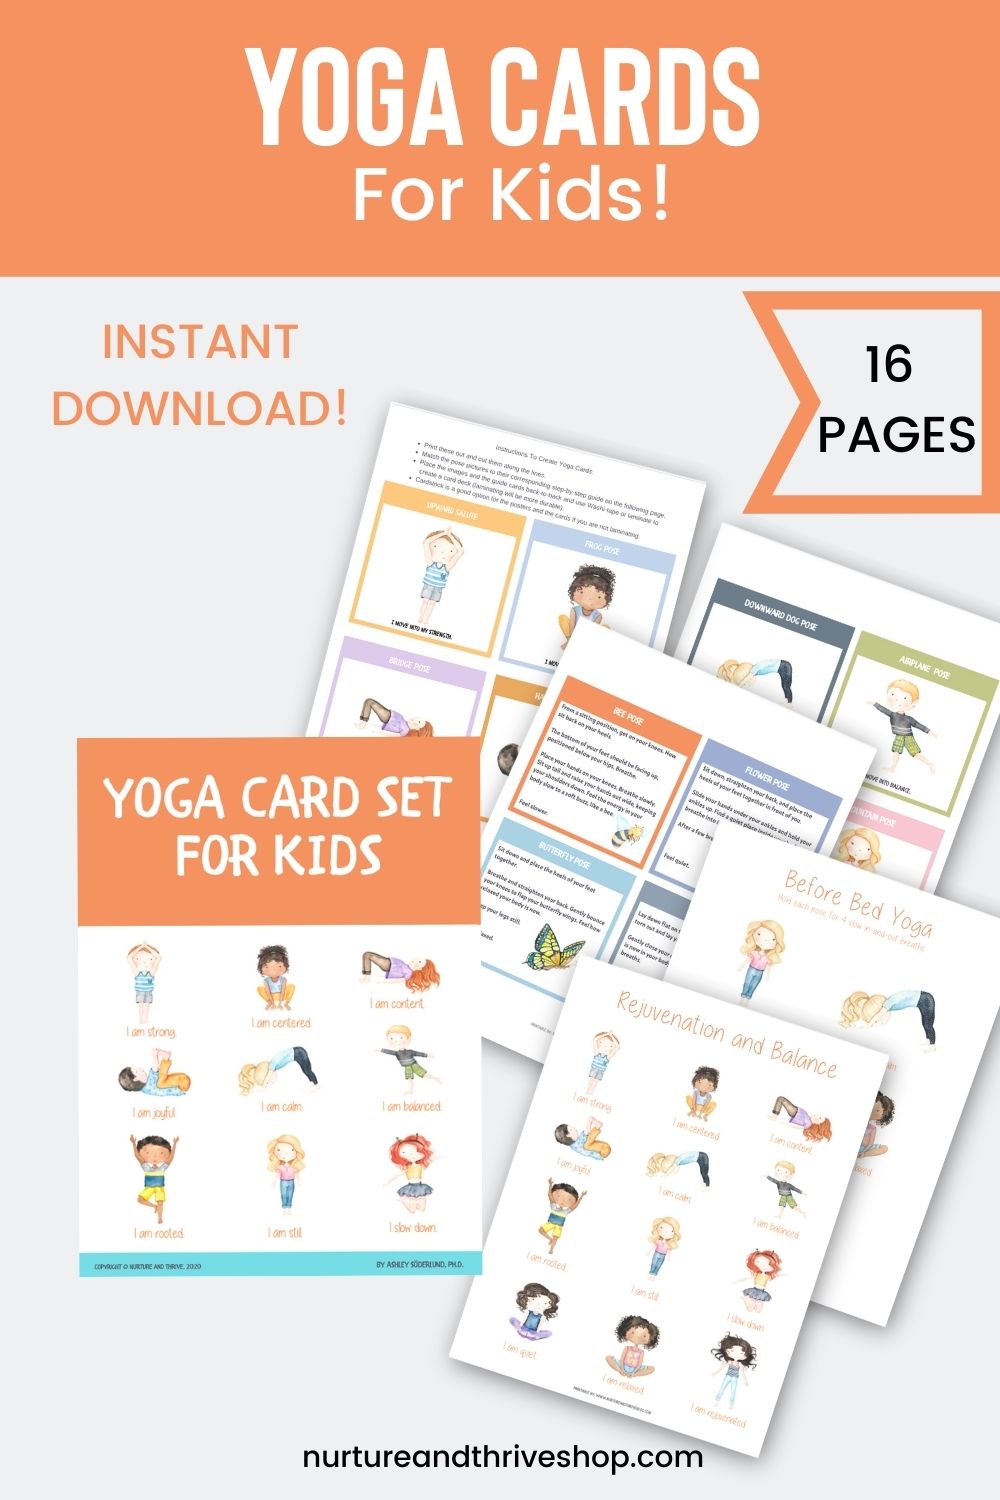 Celebrate Spring with our Printable Spring Yoga Poses Cards